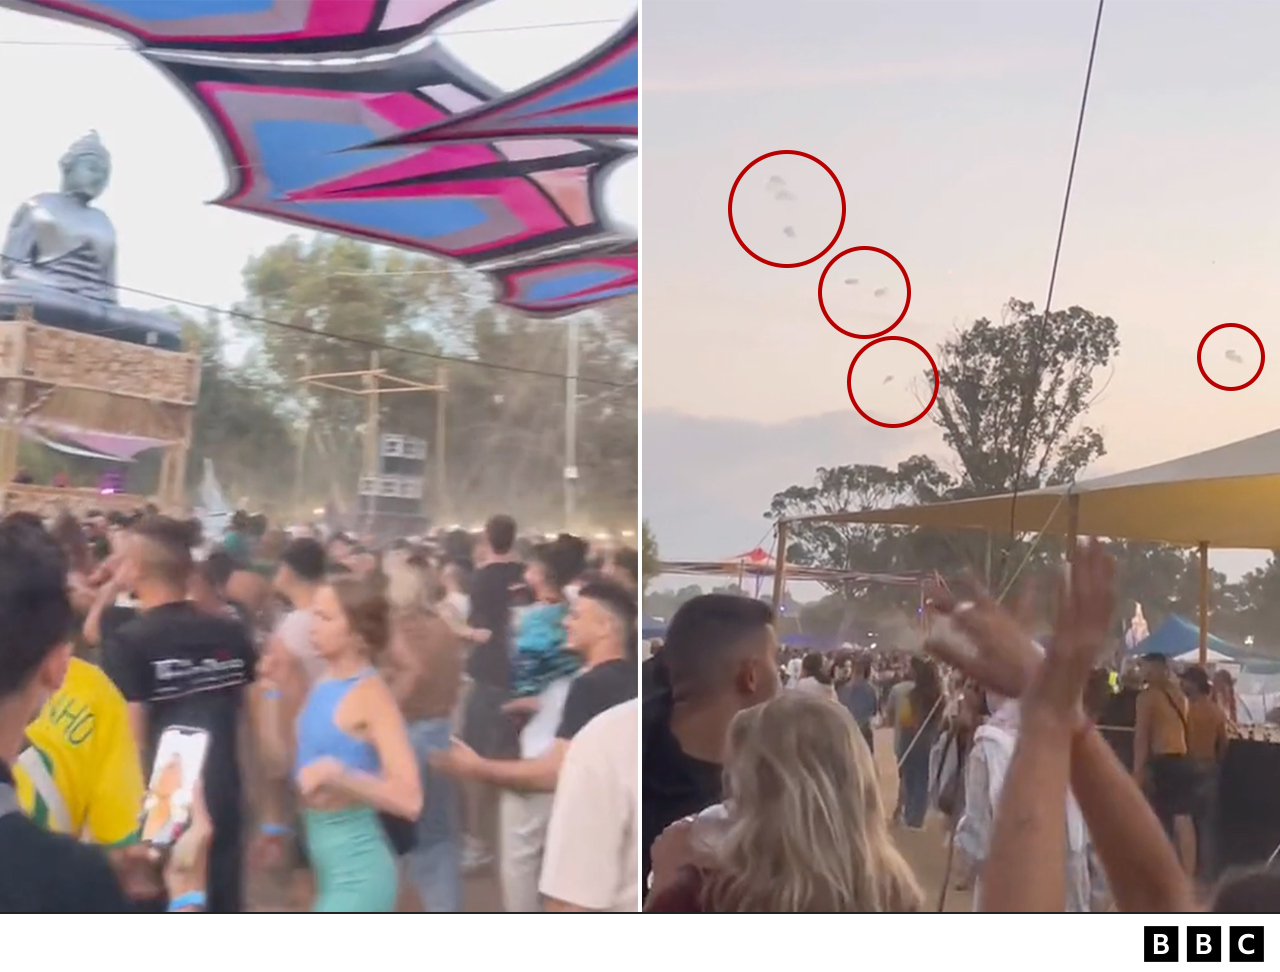 Screengrabs taken from a video of a festival in Israel